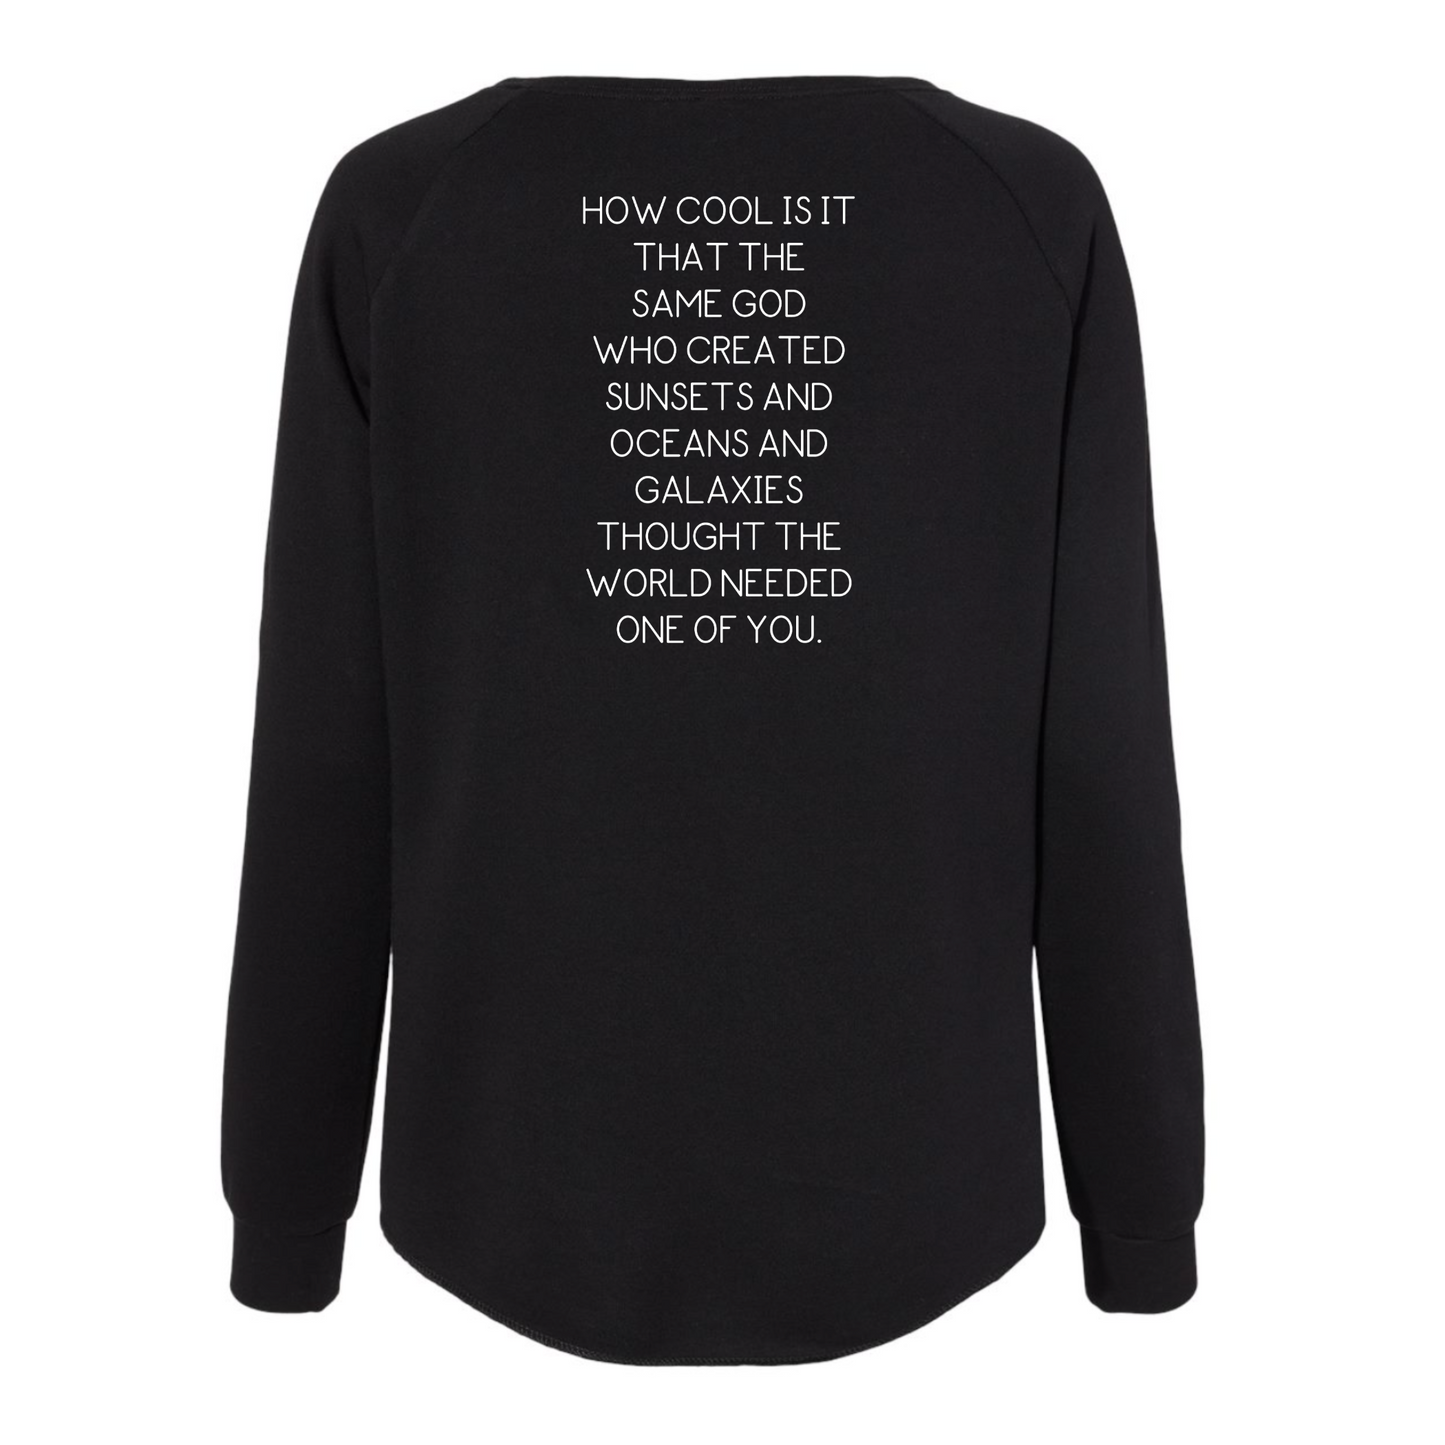 Back view of the black sweatshirt with the words"How cool is it that the same god who created sunsets and oceans and galaxies thought the world needed one of you" written on the back of it.